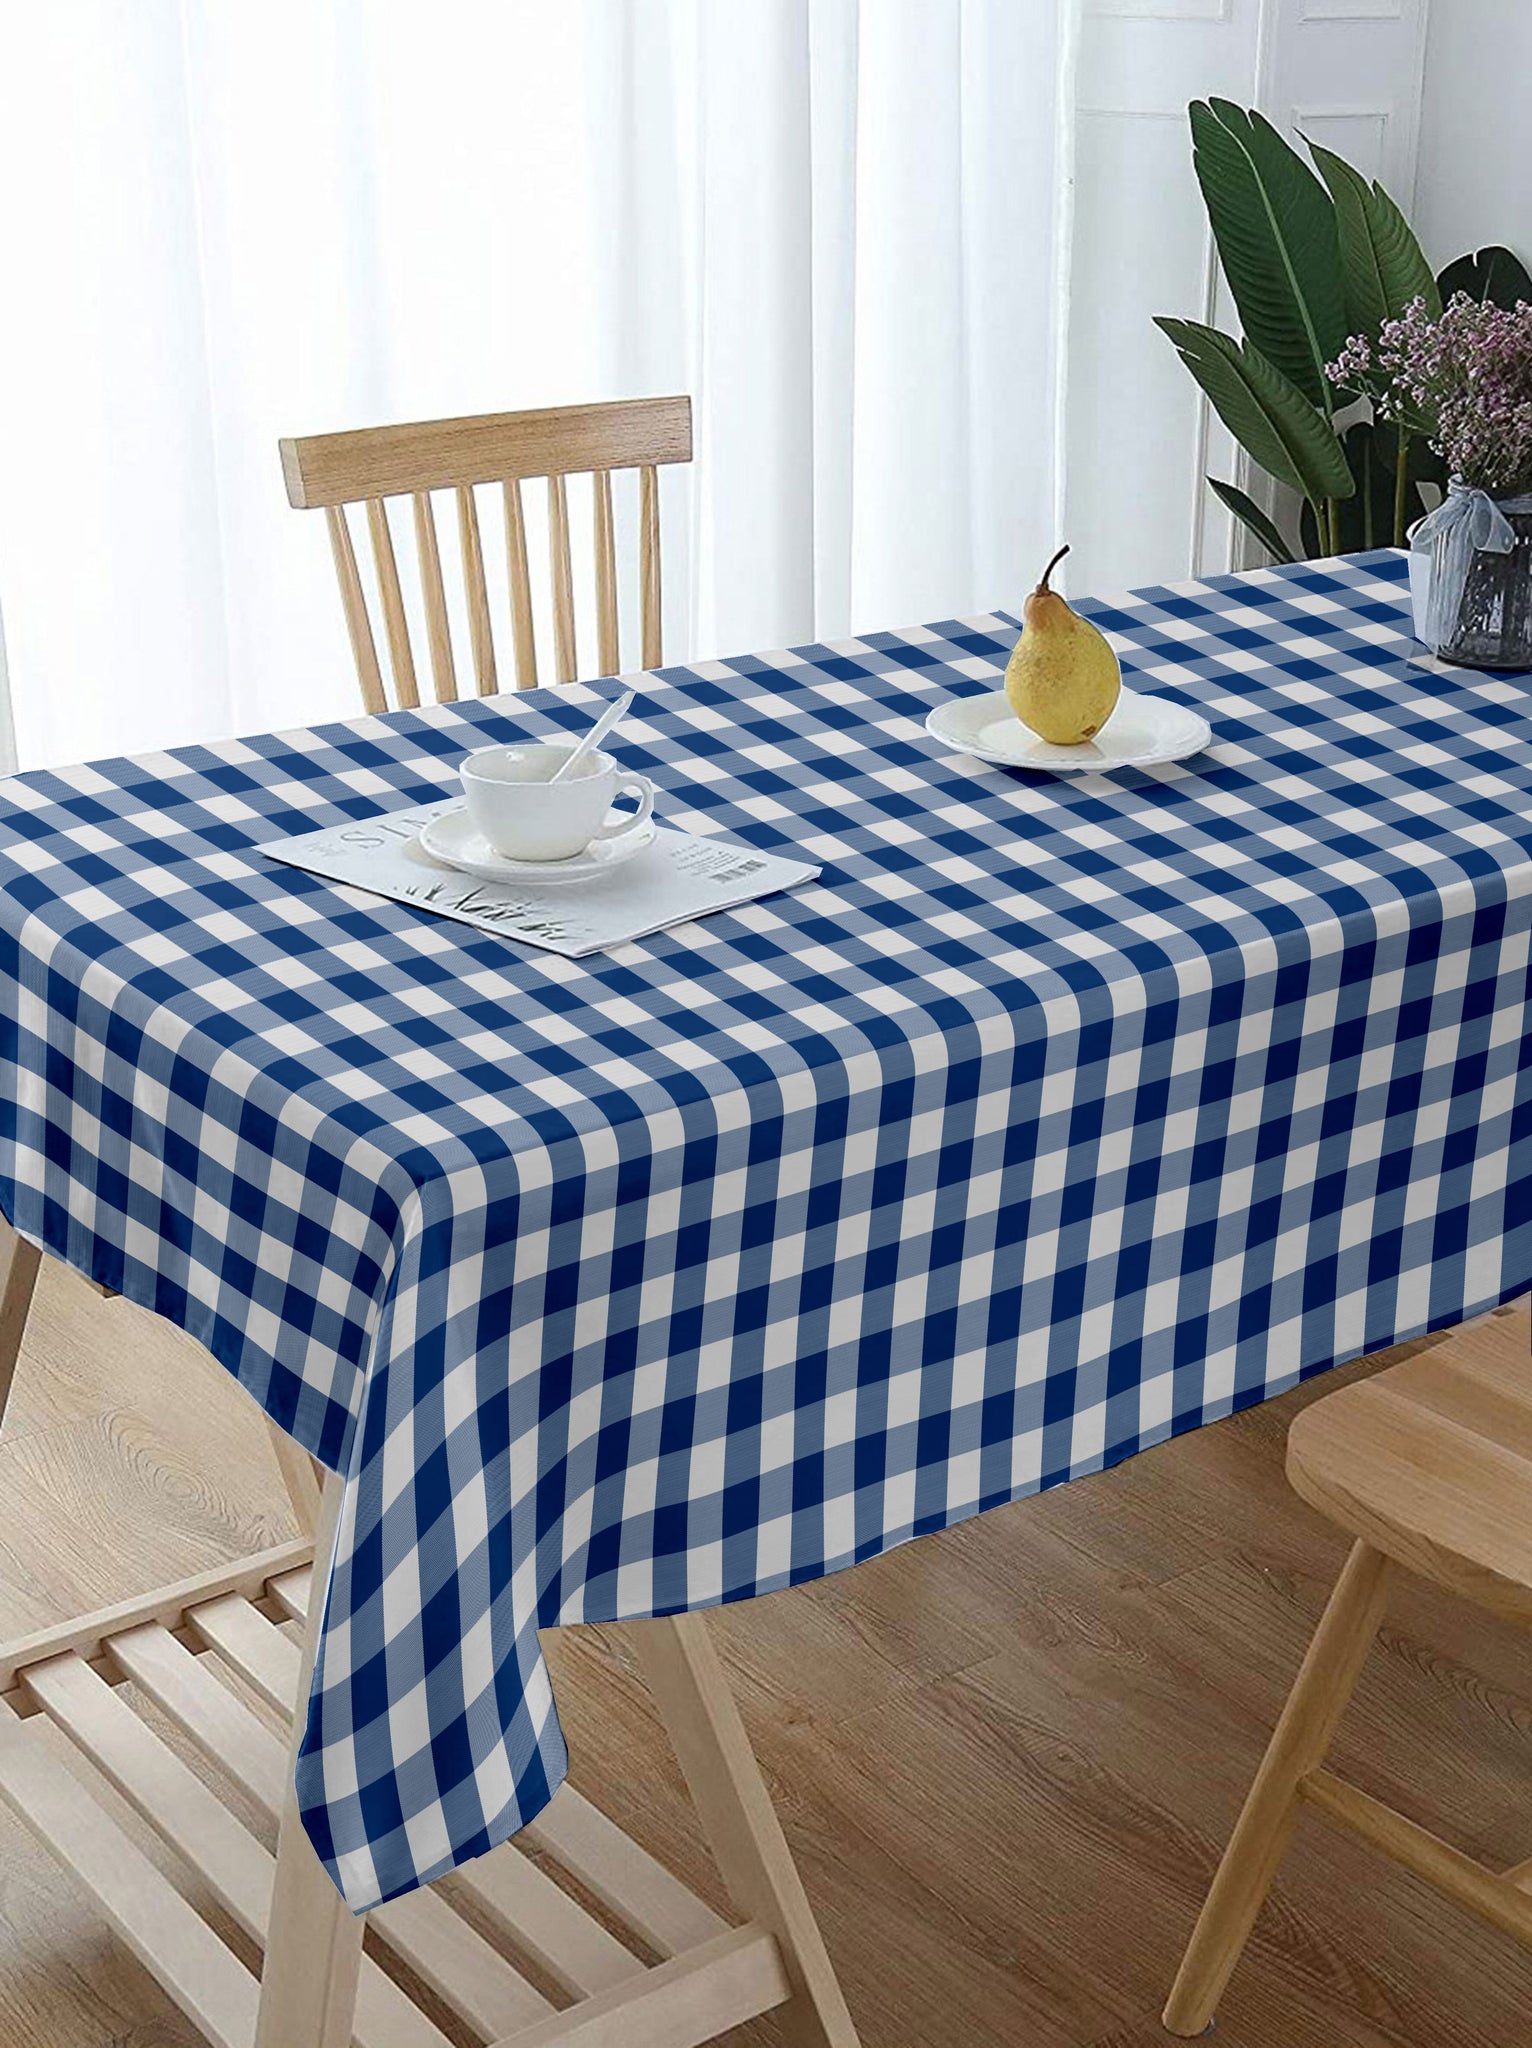 Lushomes Buffalo Checks Royal Blue Plaid Dining Table Cover Cloth (Size 60 x 84 inches, 6 Seater Table Cloth)